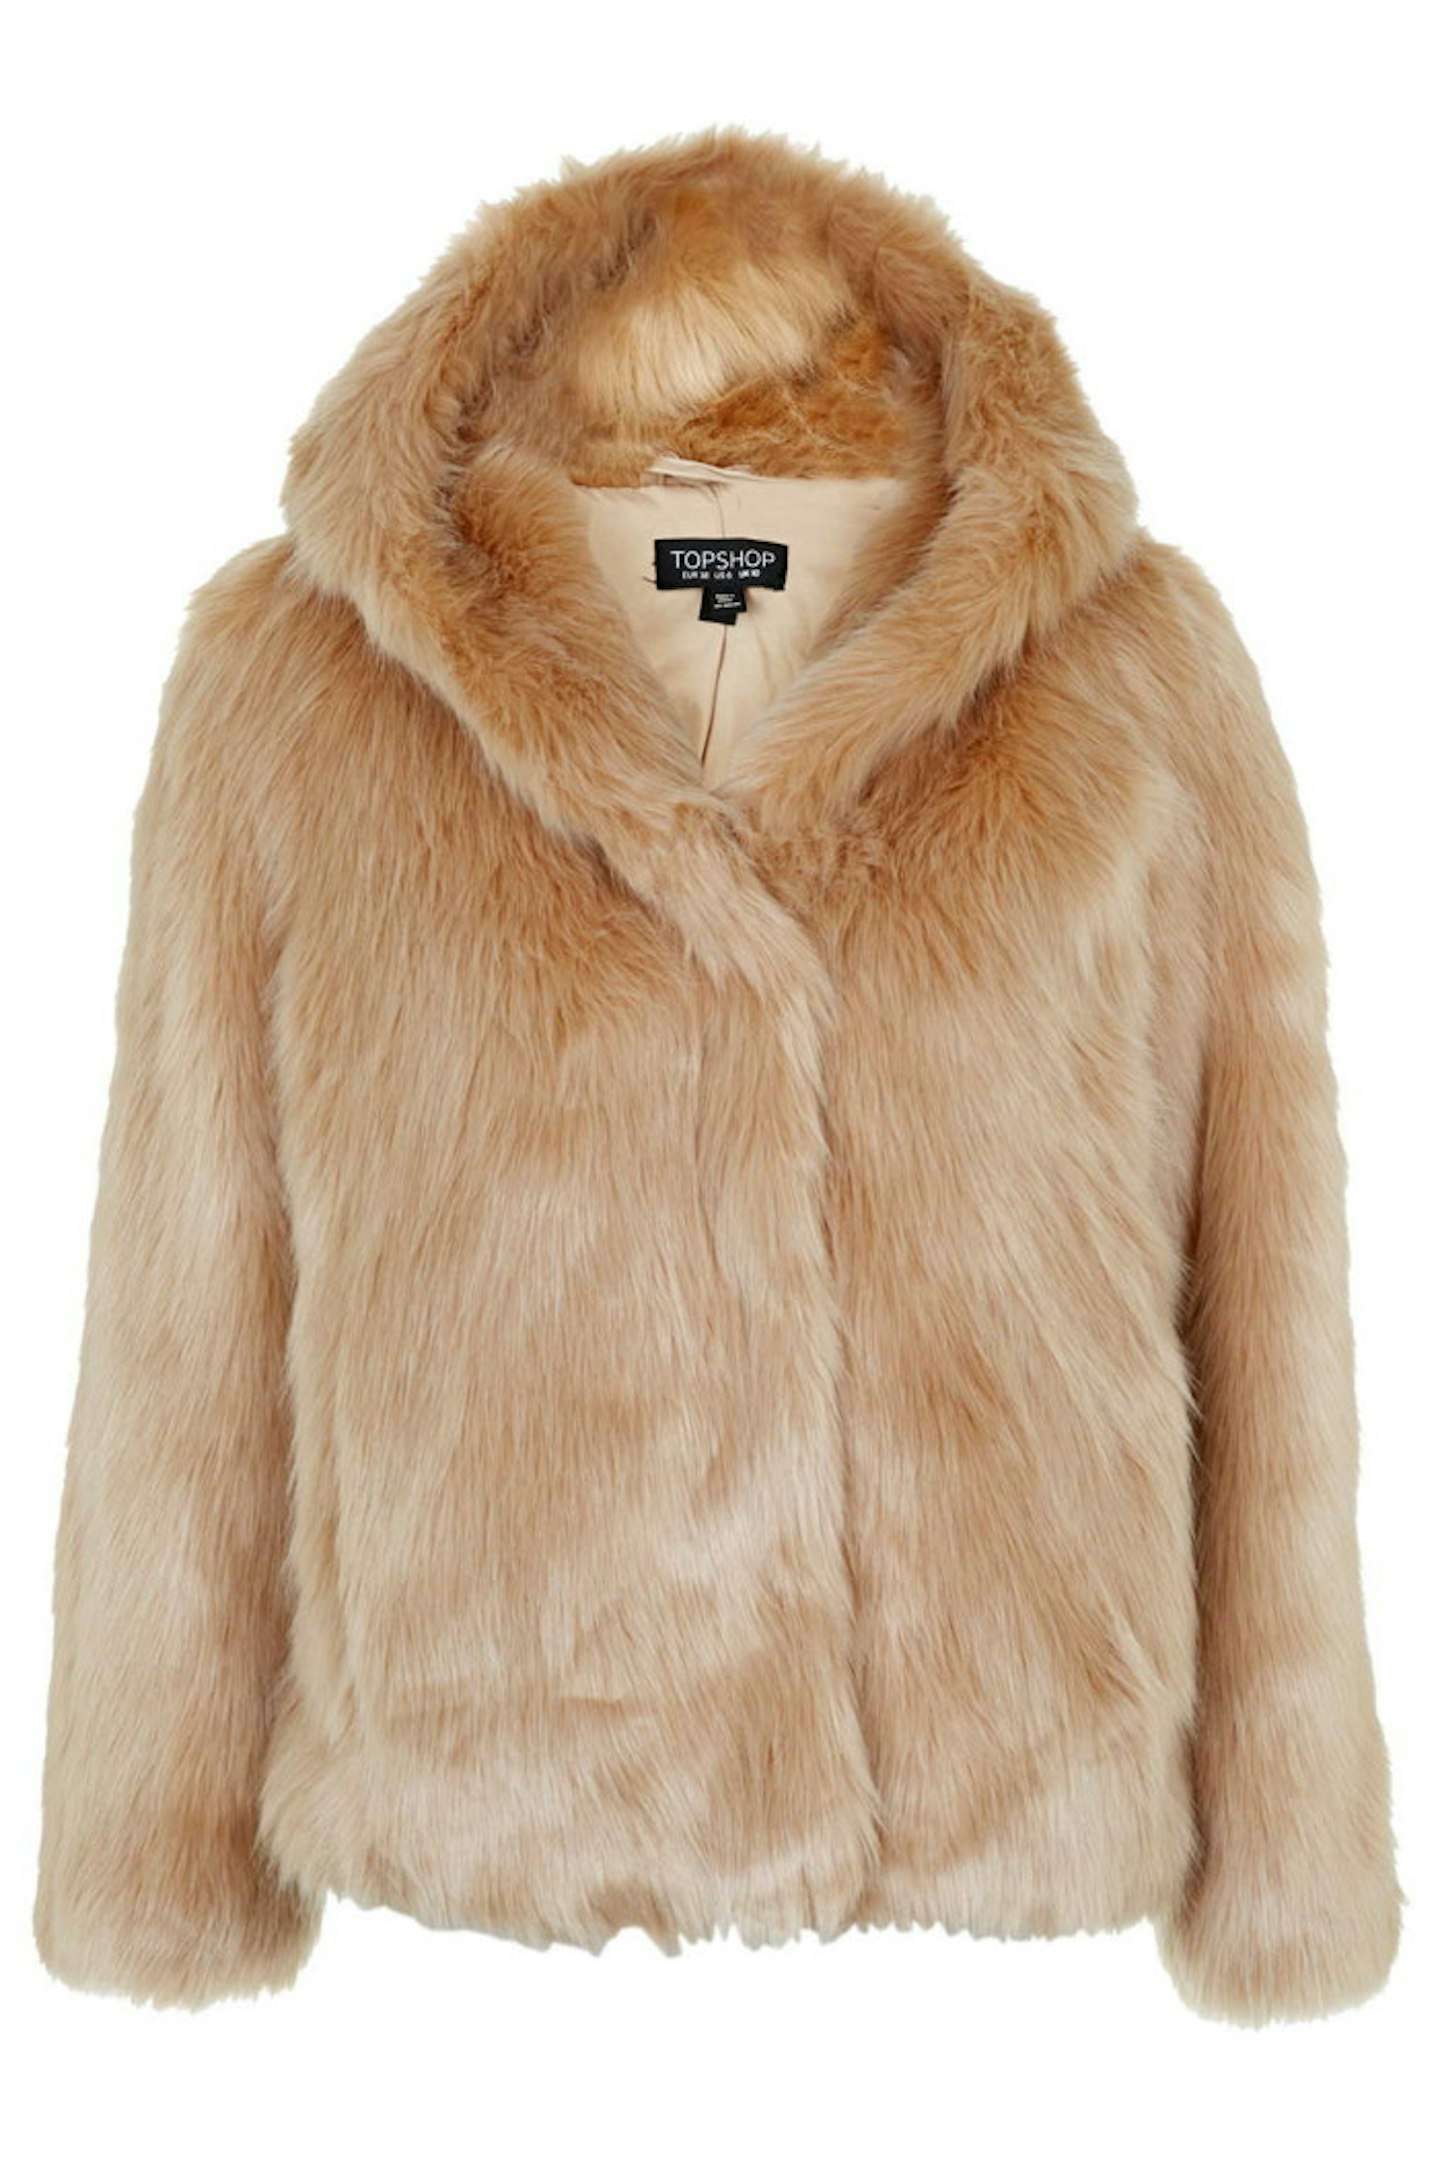 Topshop Luxe Faux Fur Hooded Coat